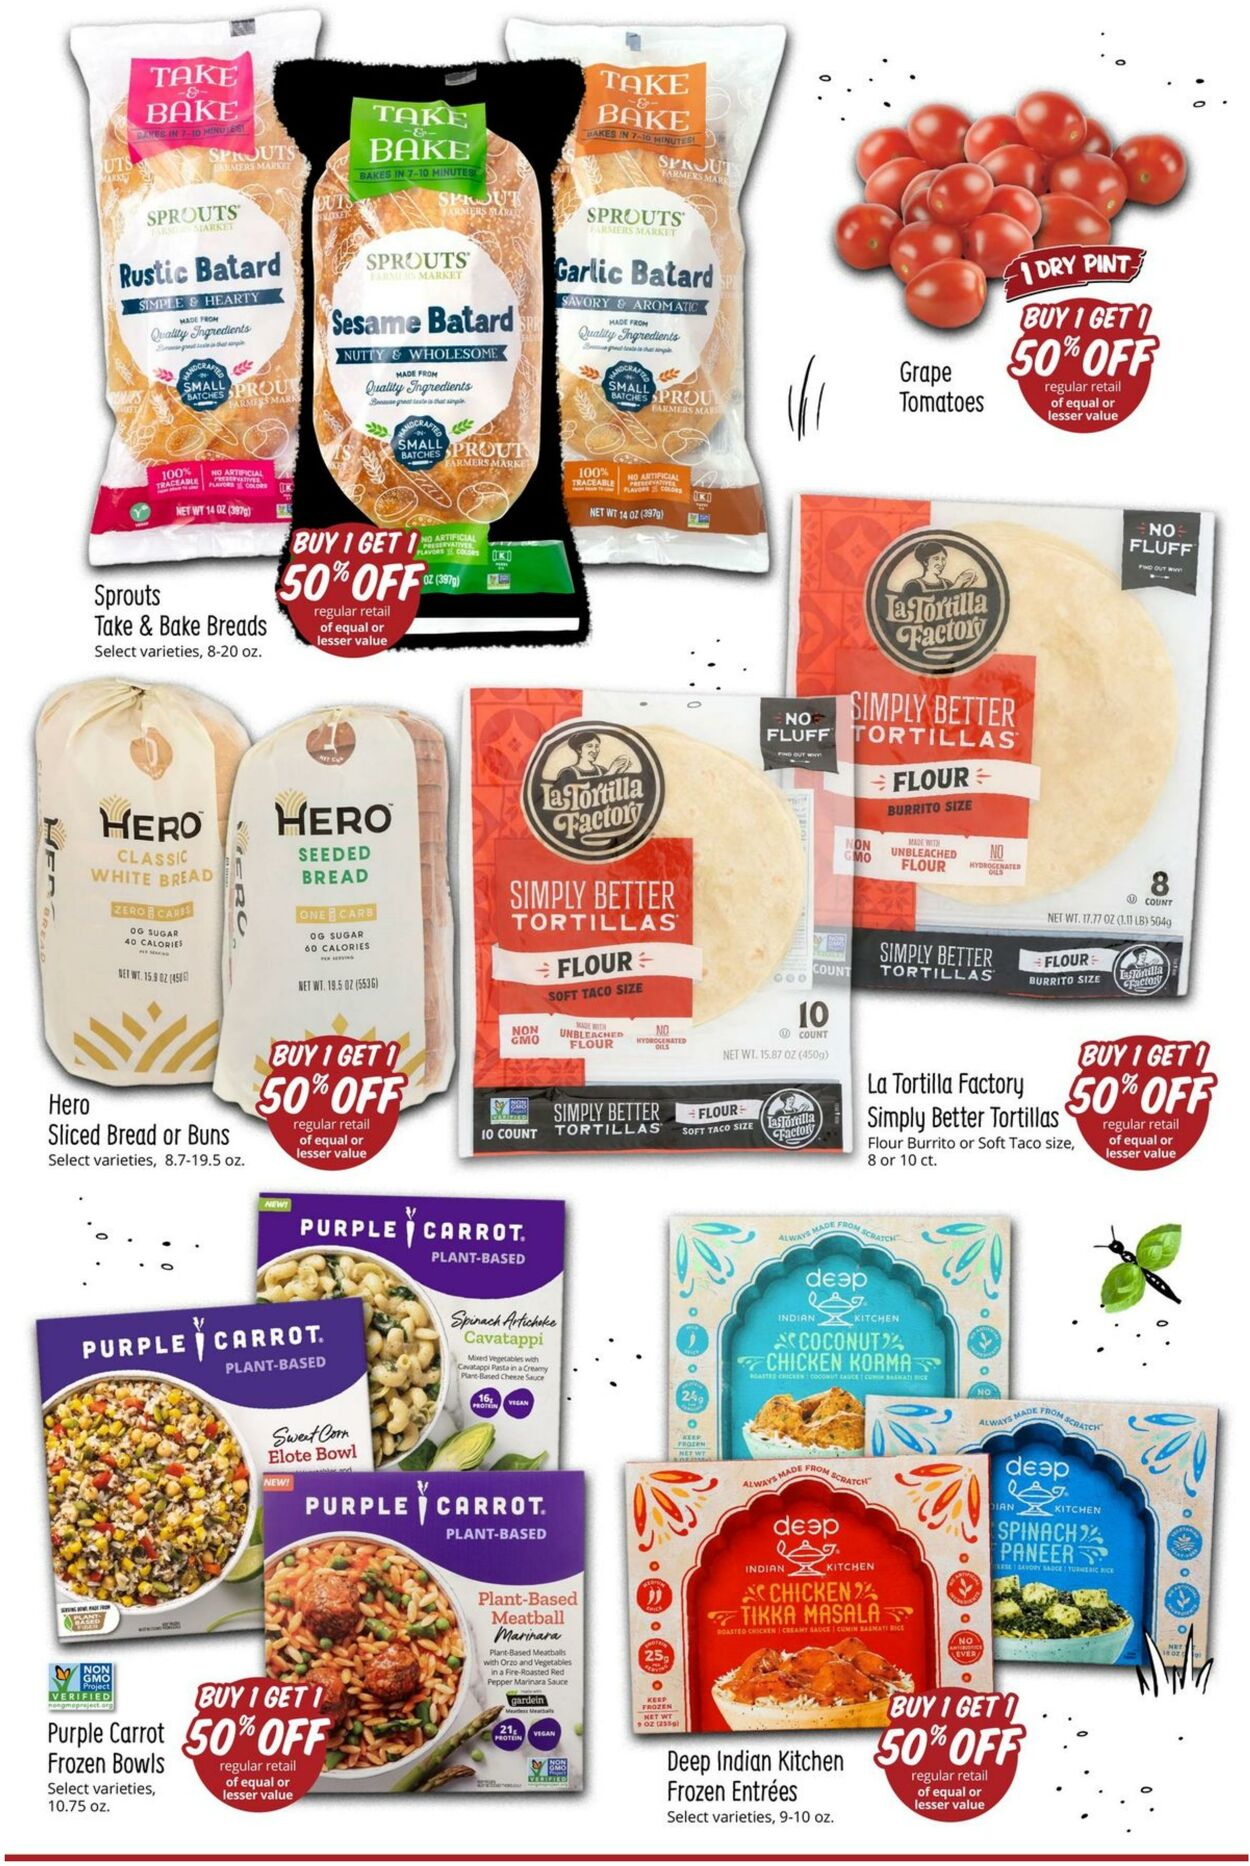 Weekly ad Sprouts 05/03/2023 - 05/09/2023